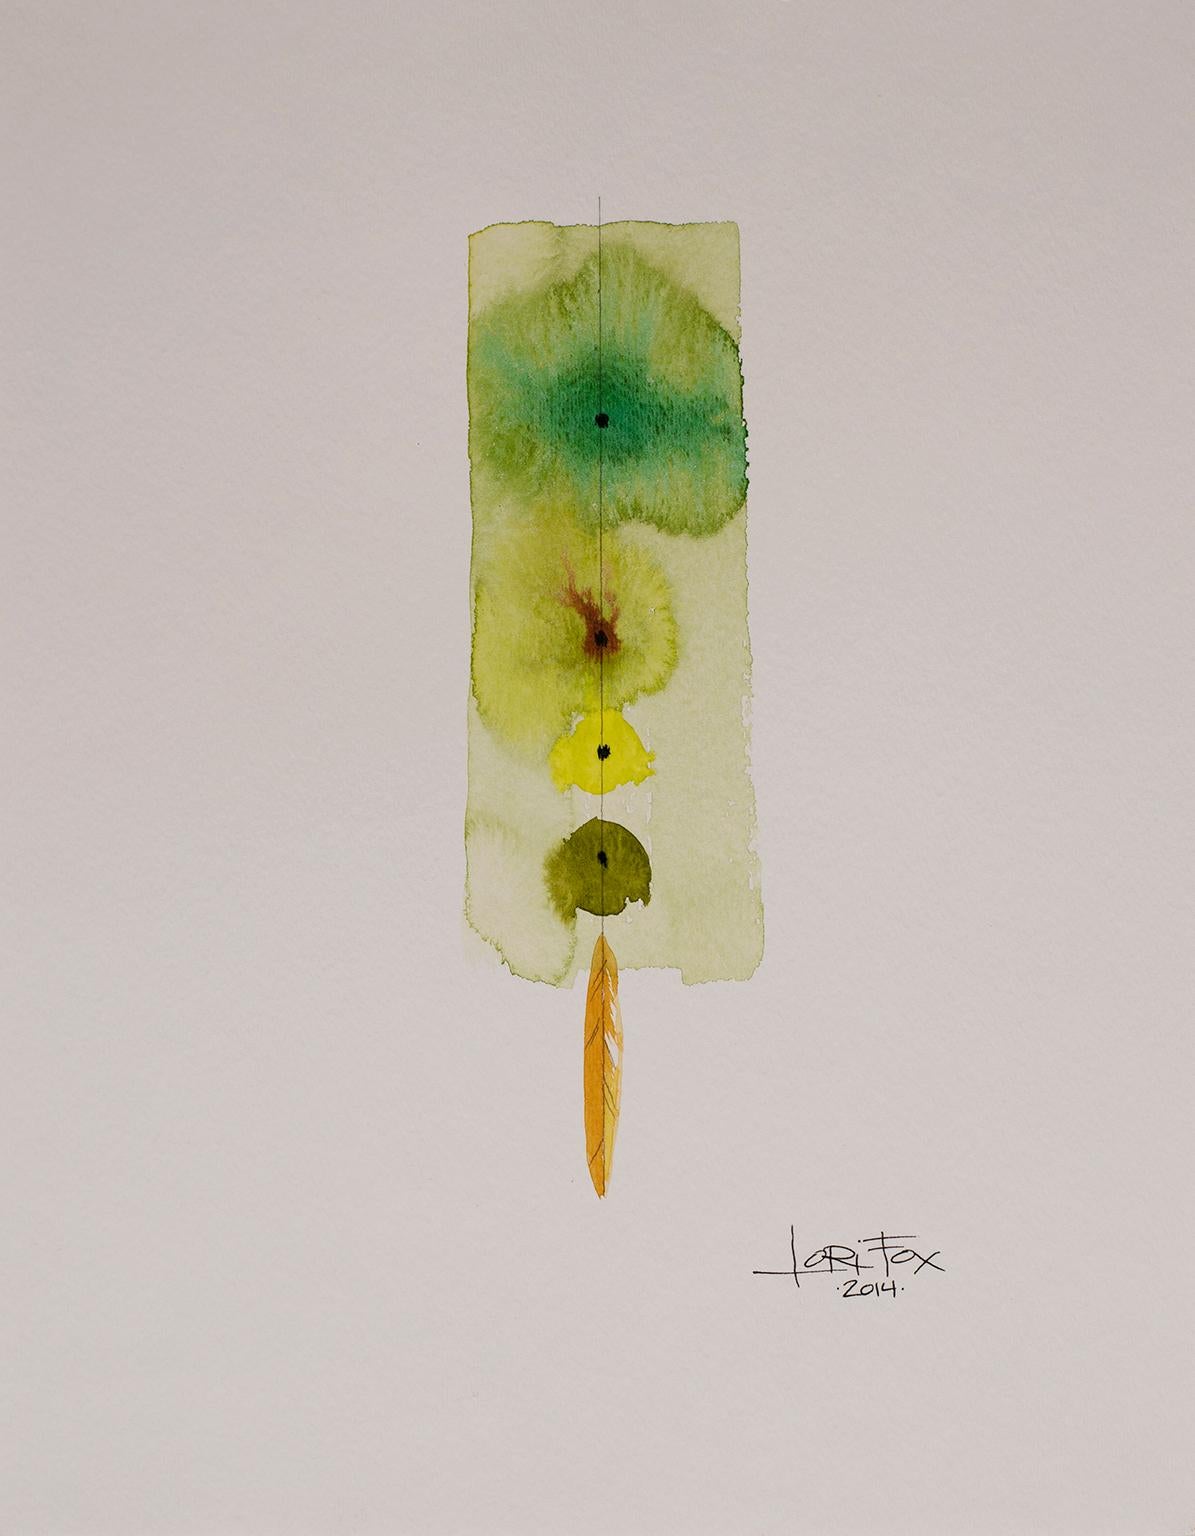 Totem 001, 2014 by Lori Fox
Watercolor and graphite on paper. 
Green and yellow hues make this original from the Totem series by Lori Fox pop. 
14 x 11 inch unframed.
Framed size is 15.25 x 12.25 x 1.75 inch (ask about framed price)

Totem:  An